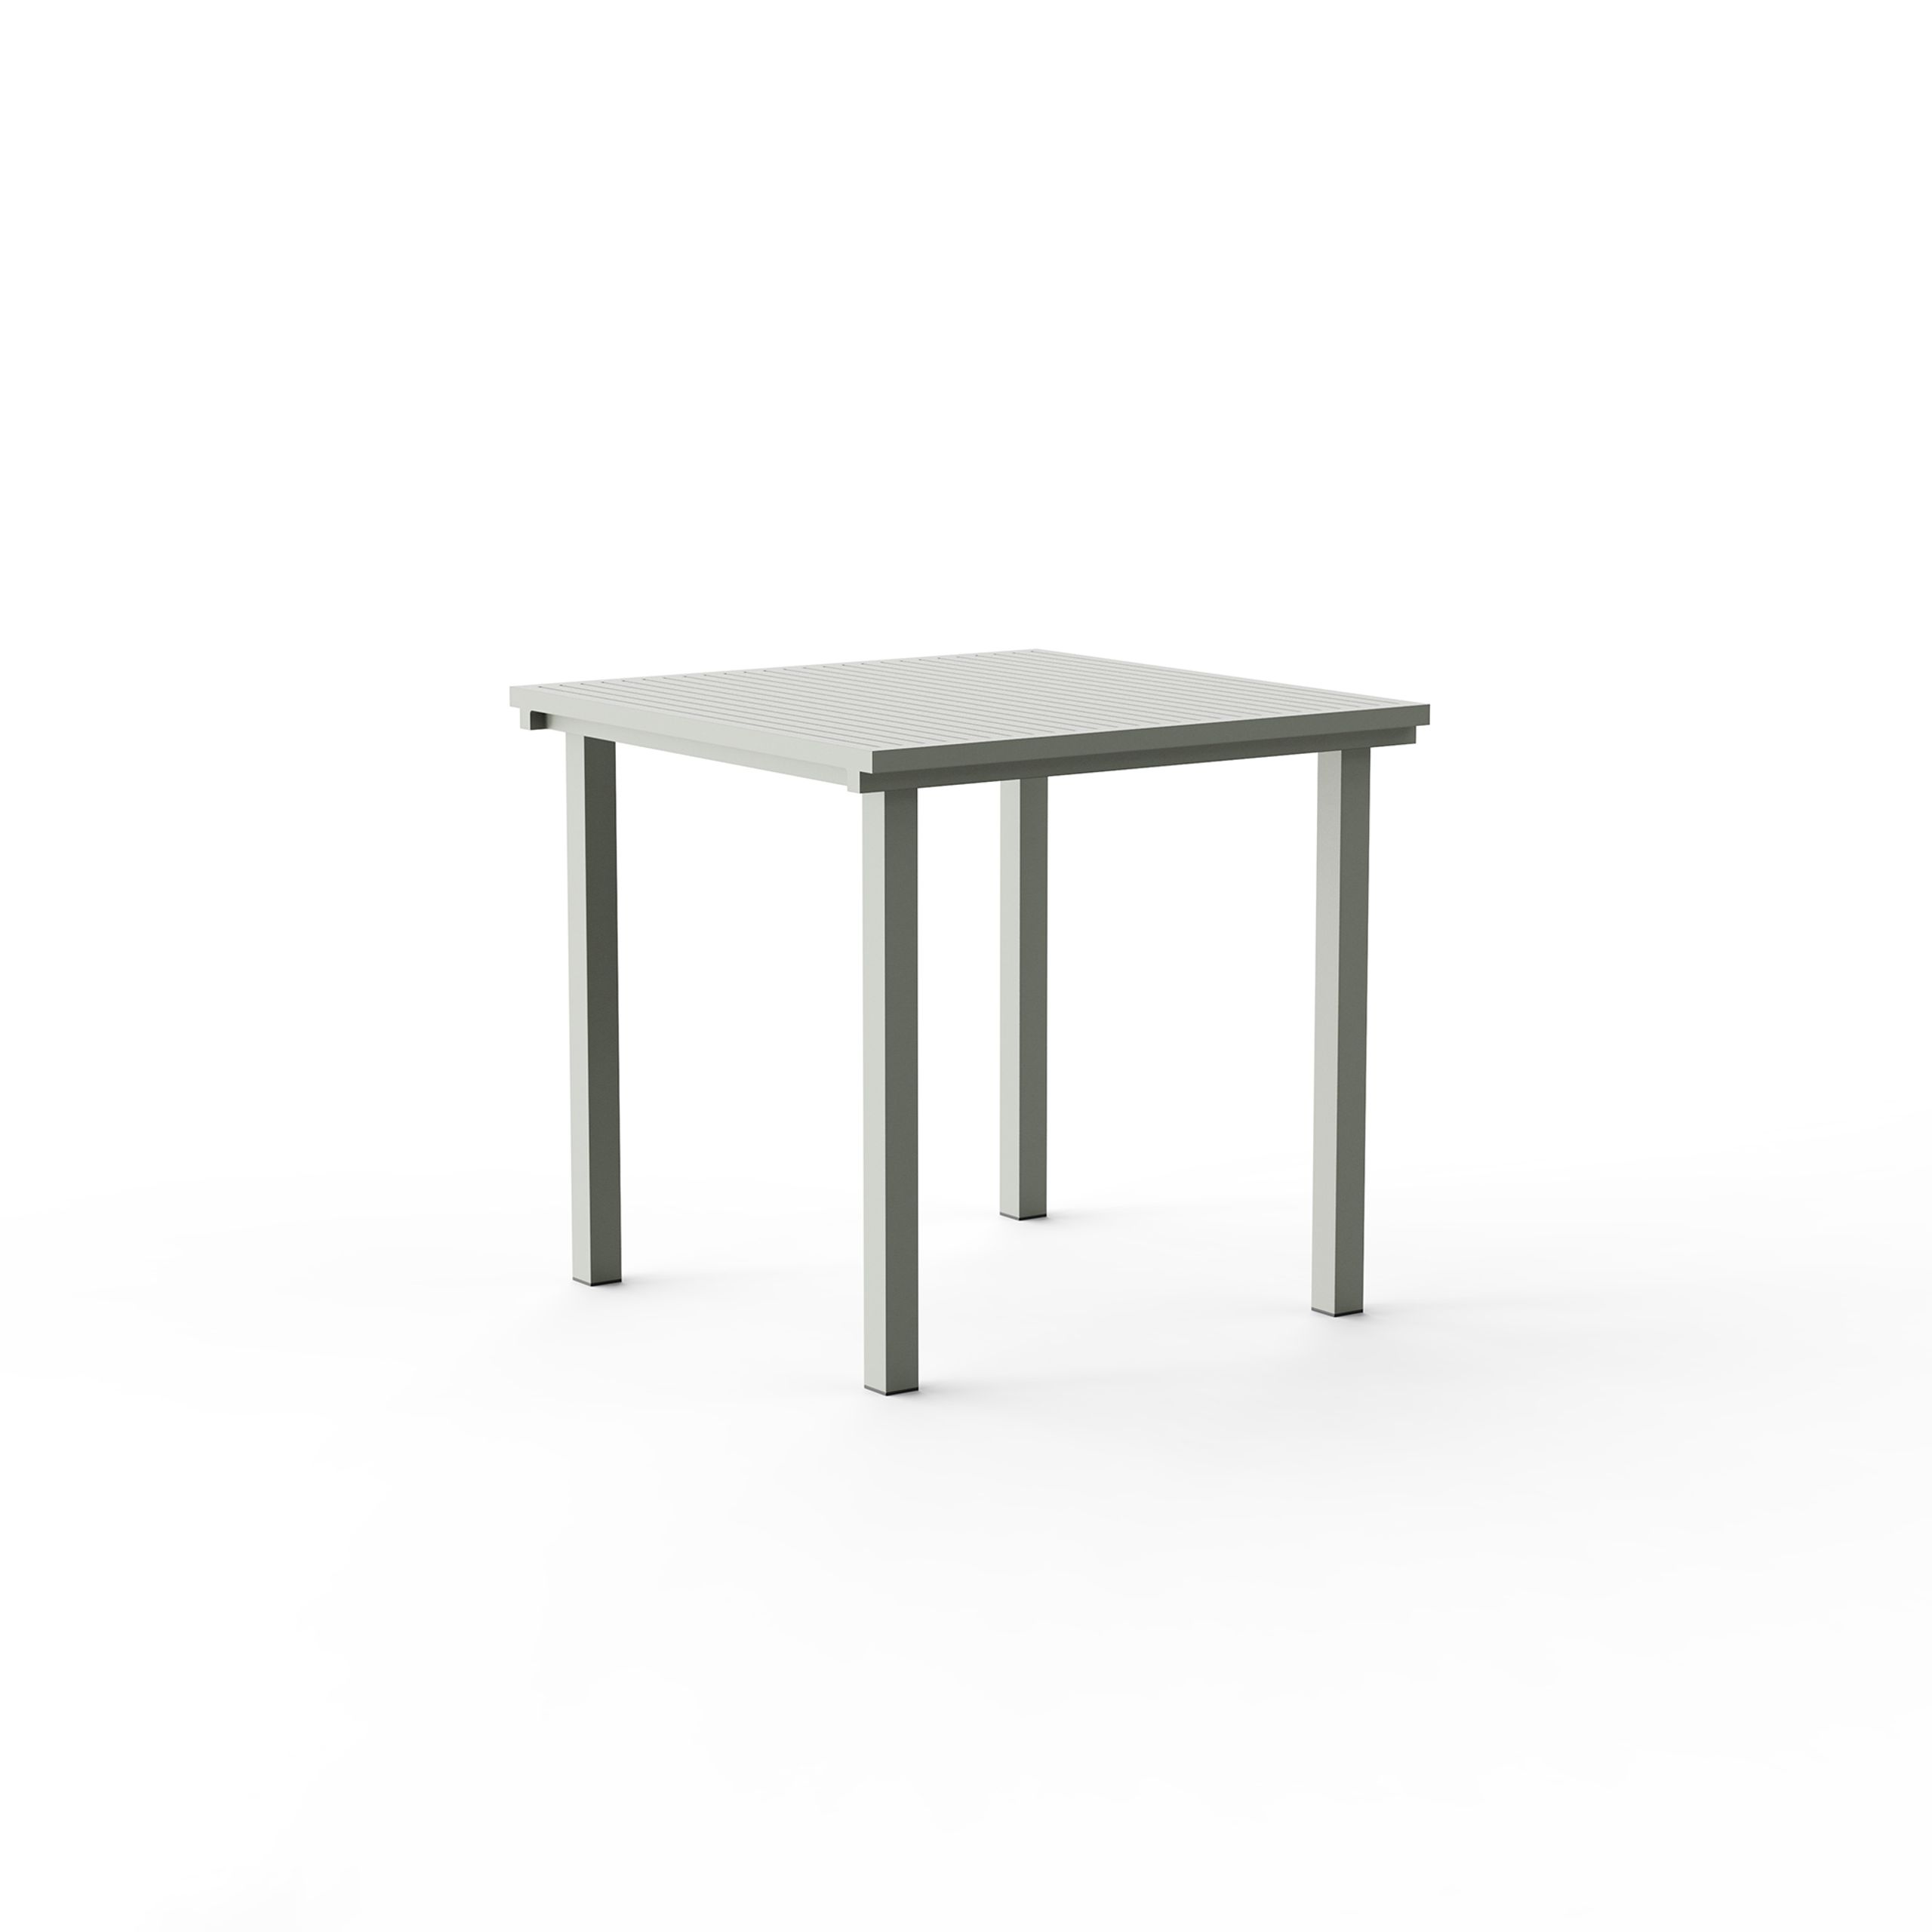 NINE -  - 19 Outdoors - Dining Table 805 X 805 - Grey